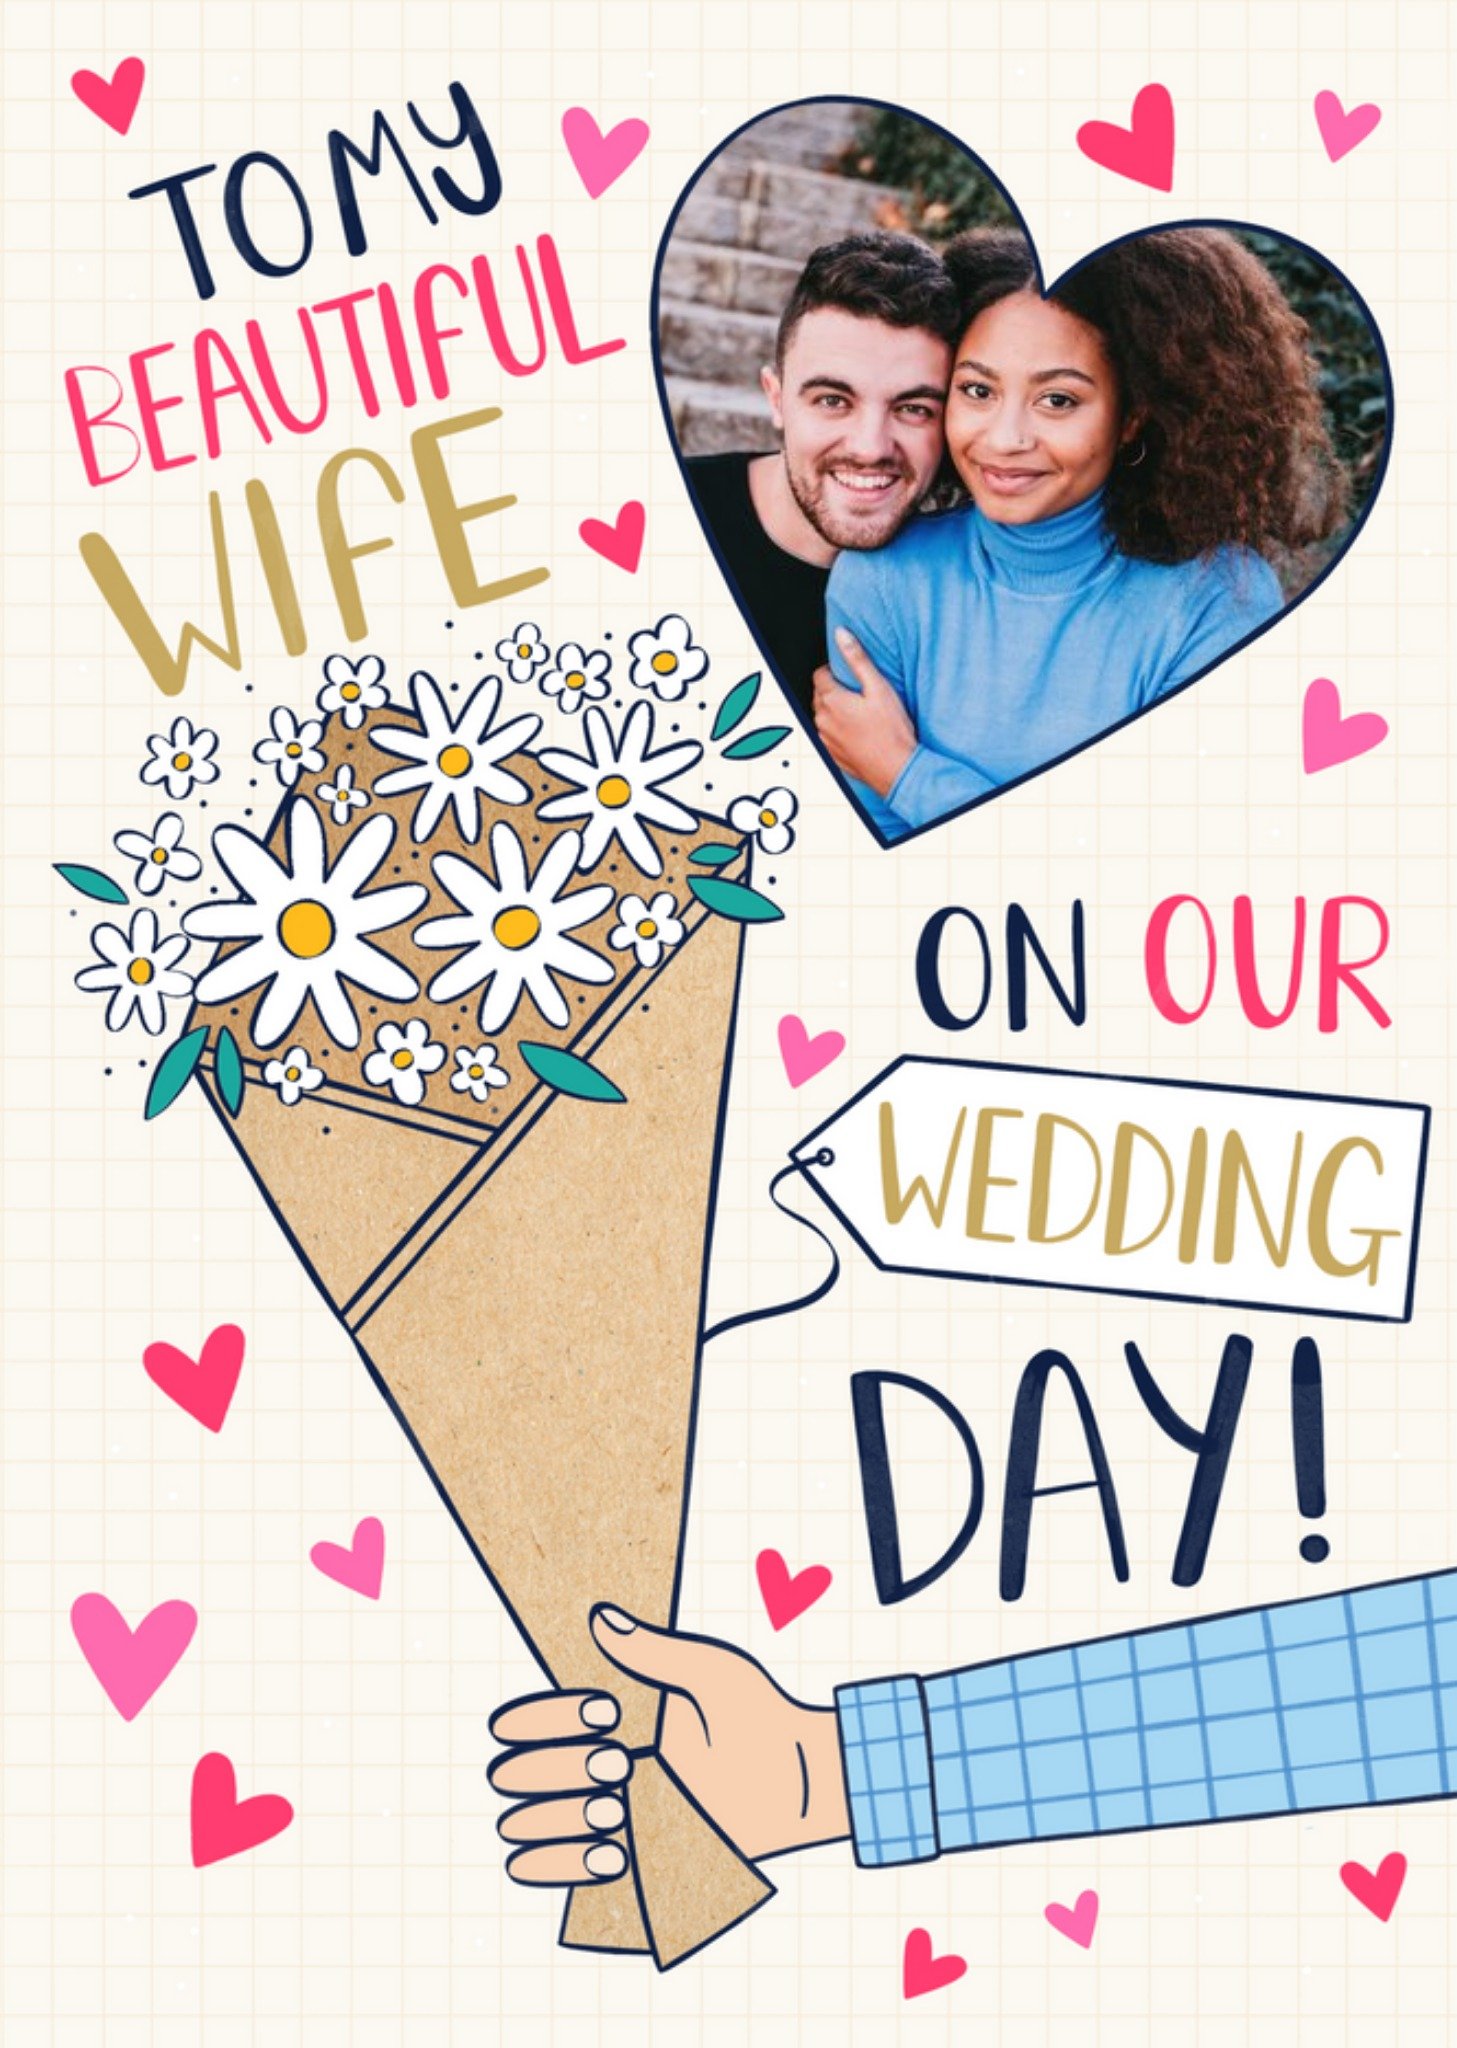 Moonpig Illustrated Bouquet To My Beautiful Wife On Our Wedding Day Photo Upload Card Ecard